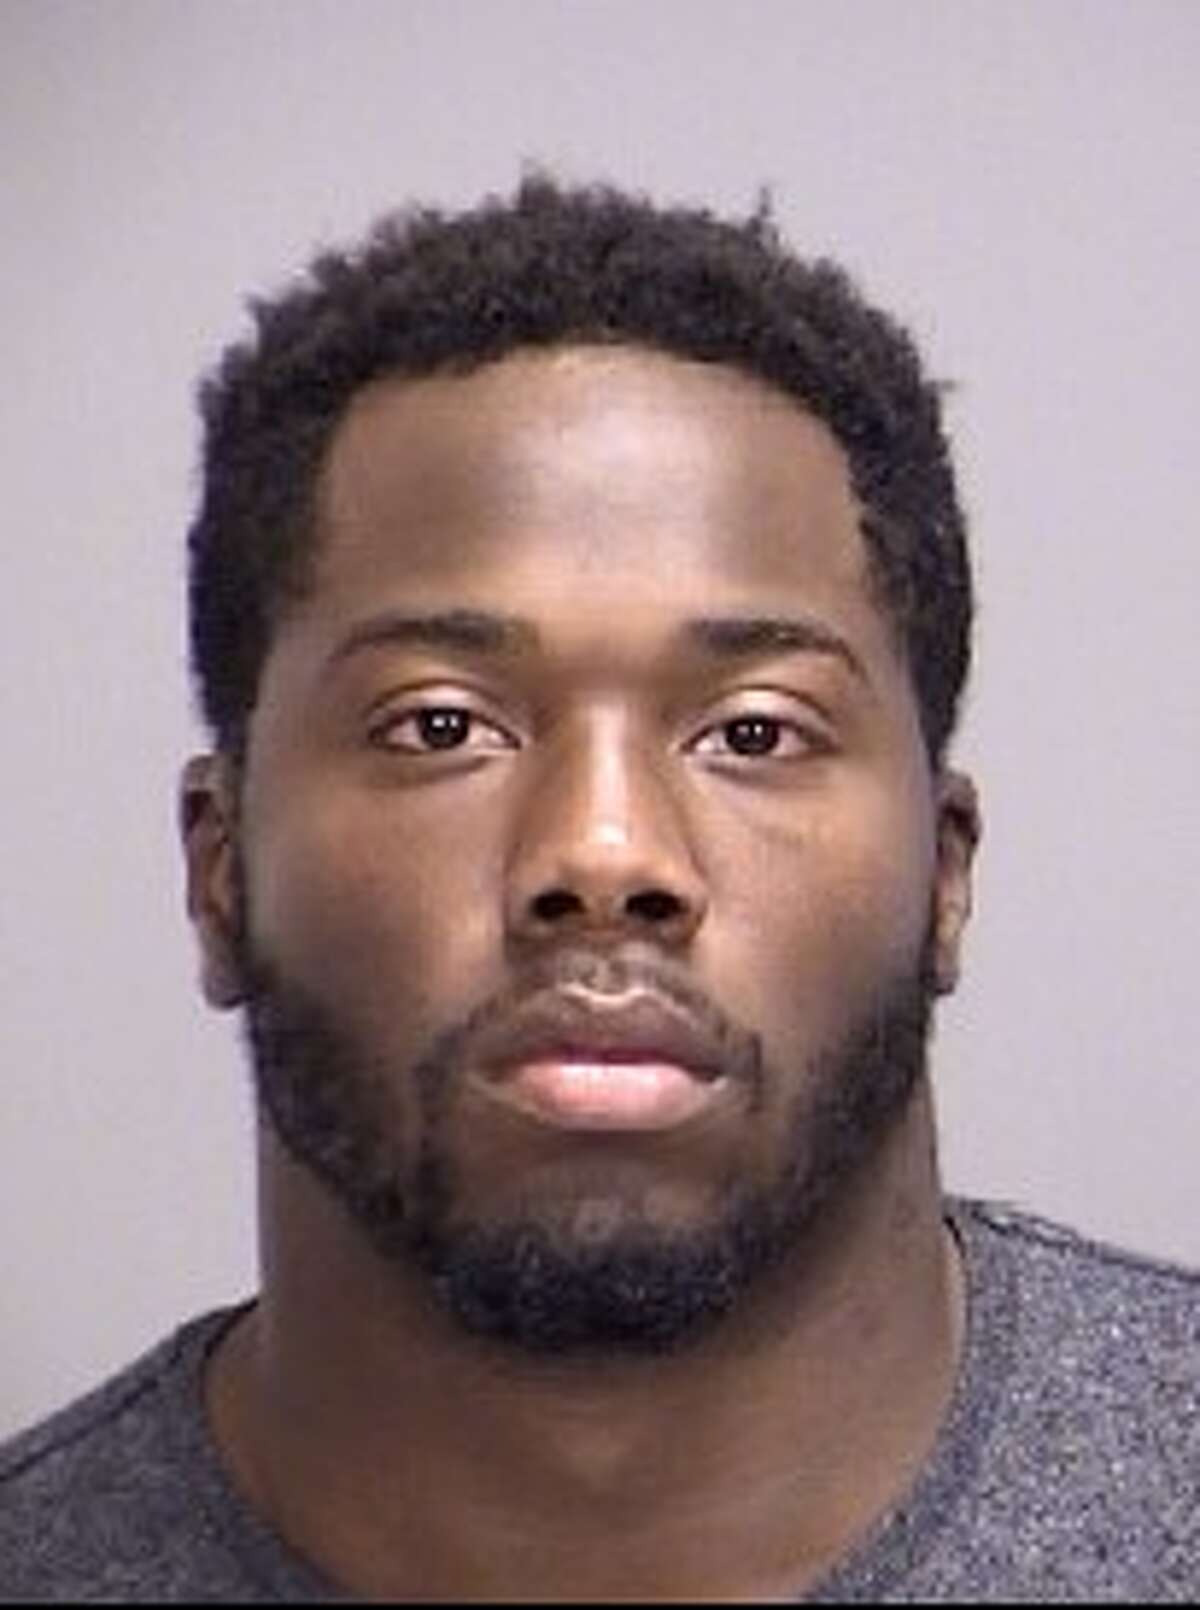 Texas A&M junior linebacker Josh Walker was arrested late Friday night on a domestic assault charge.